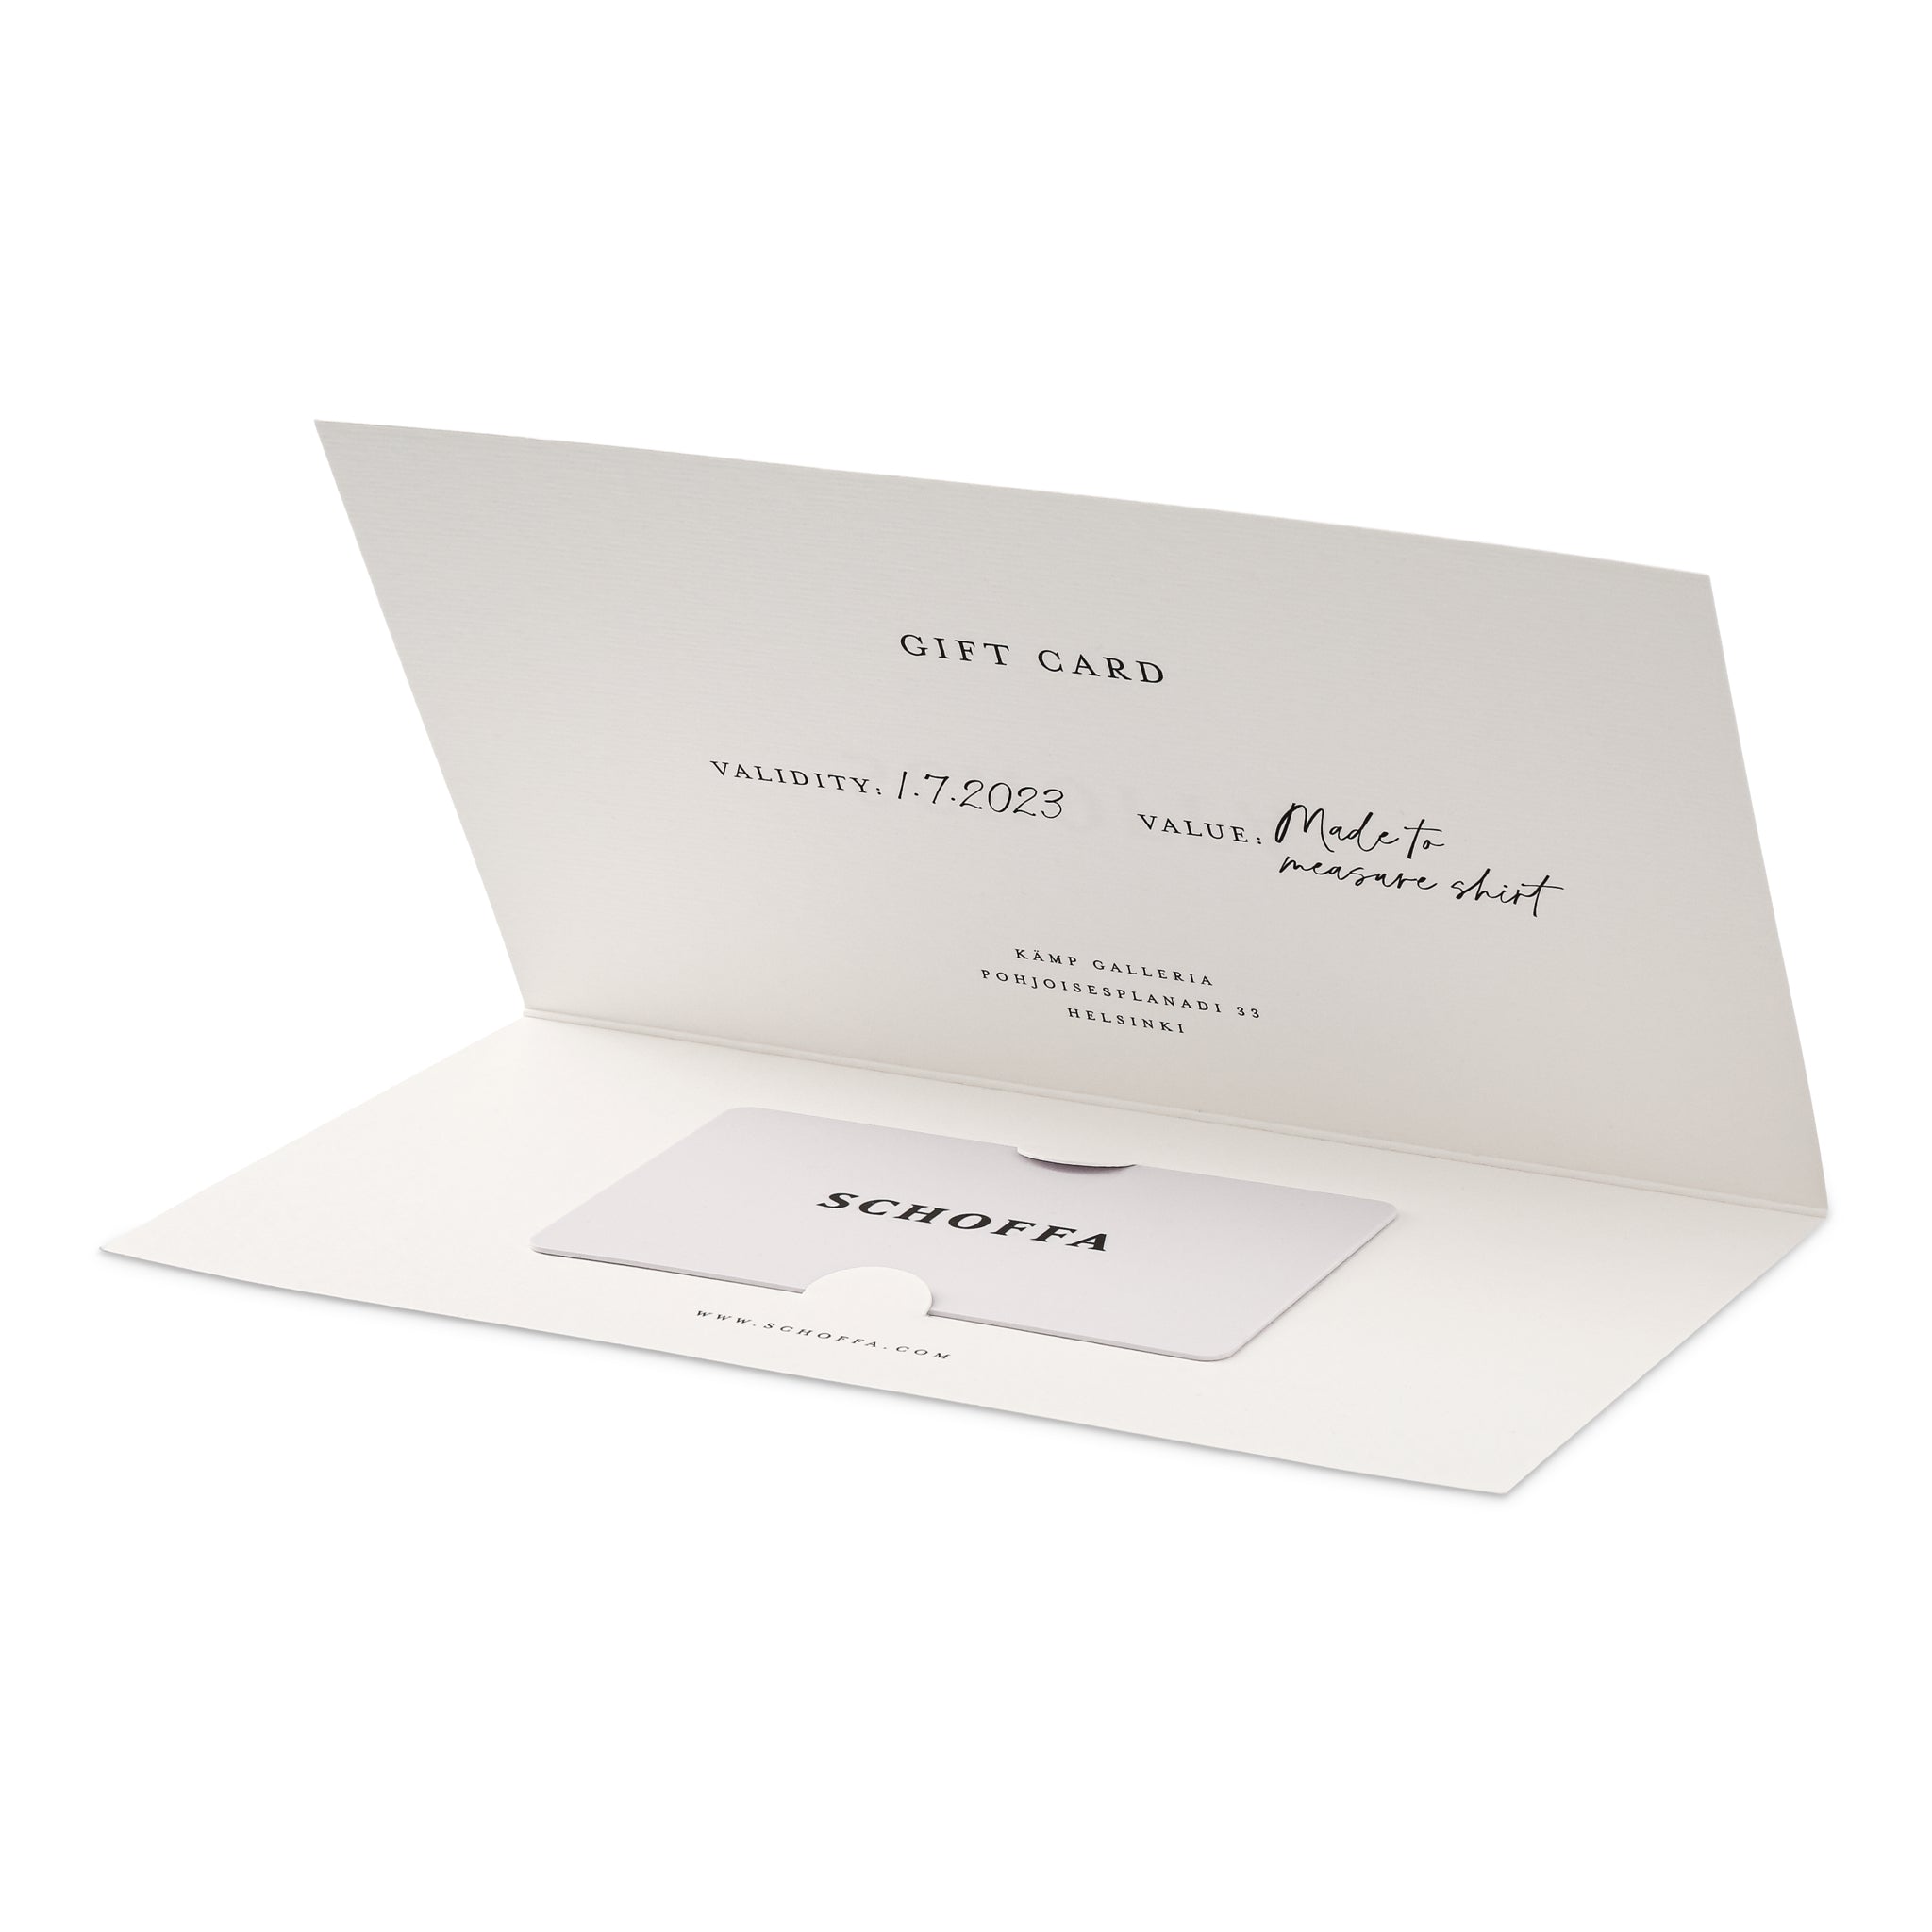 Lisa Cartmell | Super Luxury Business Cards